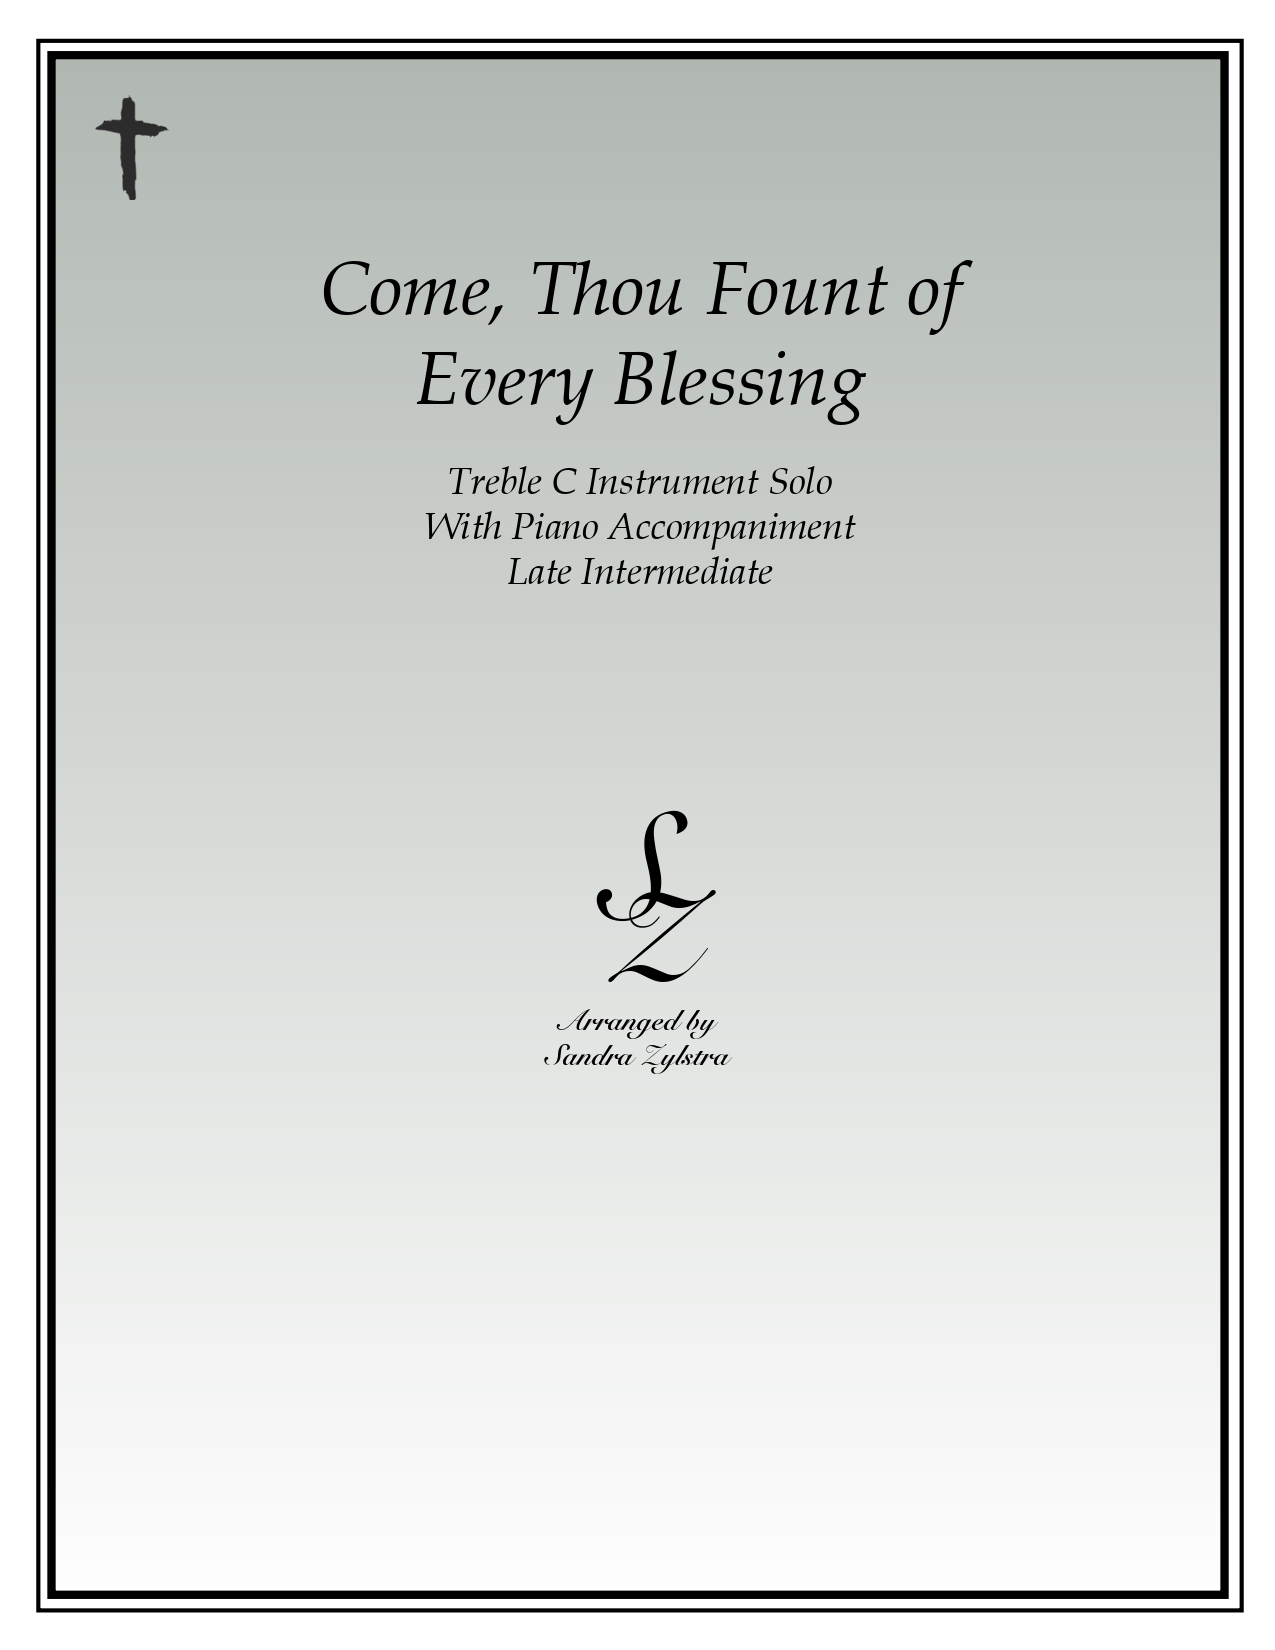 Come Thou Fount Of Every Blessing treble C instrument solo part cover0 page 00011